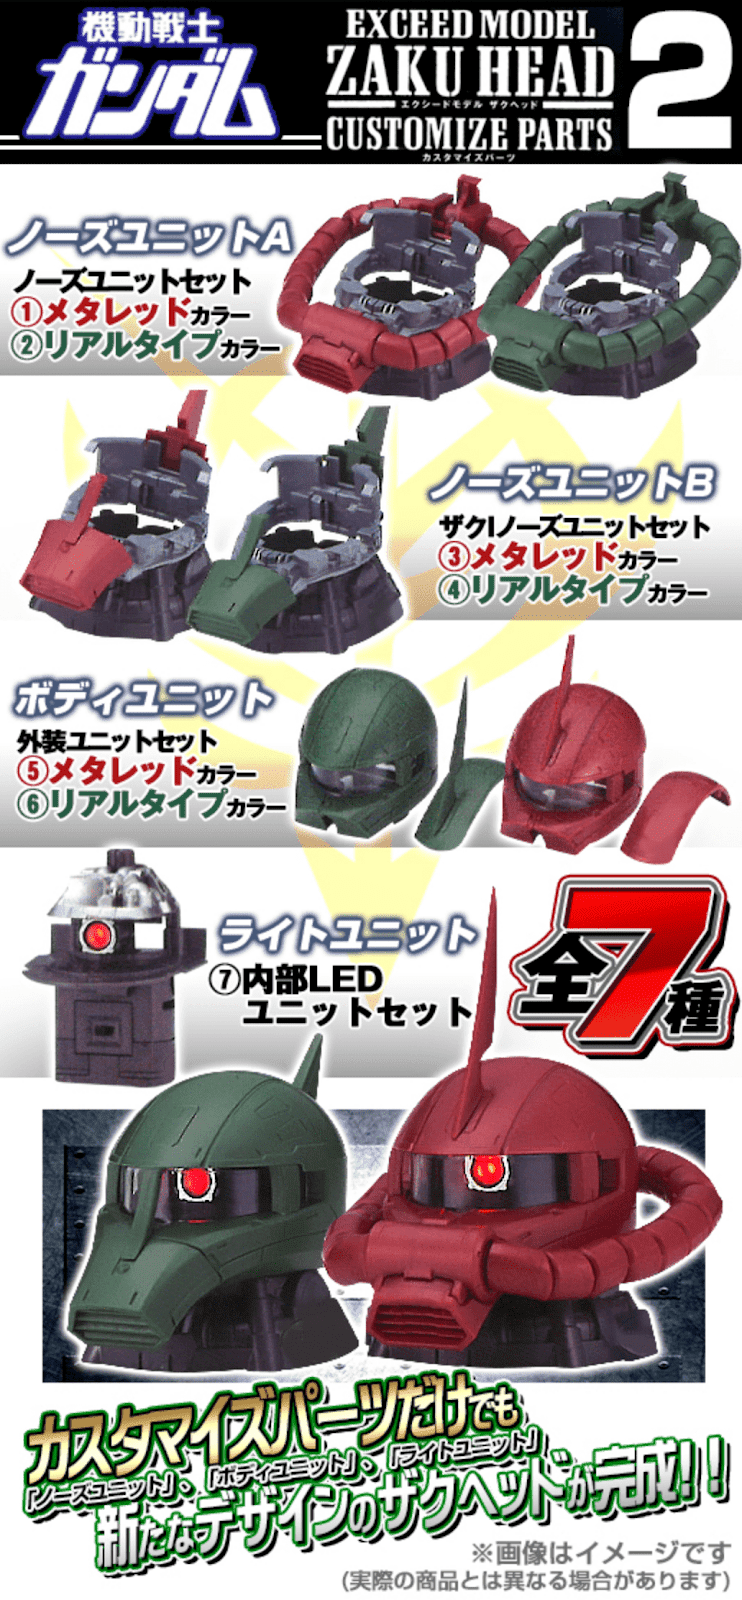 Exceed Model Zaku Head Customized Parts 2 Release Info Gundam Kits Collection News And Reviews